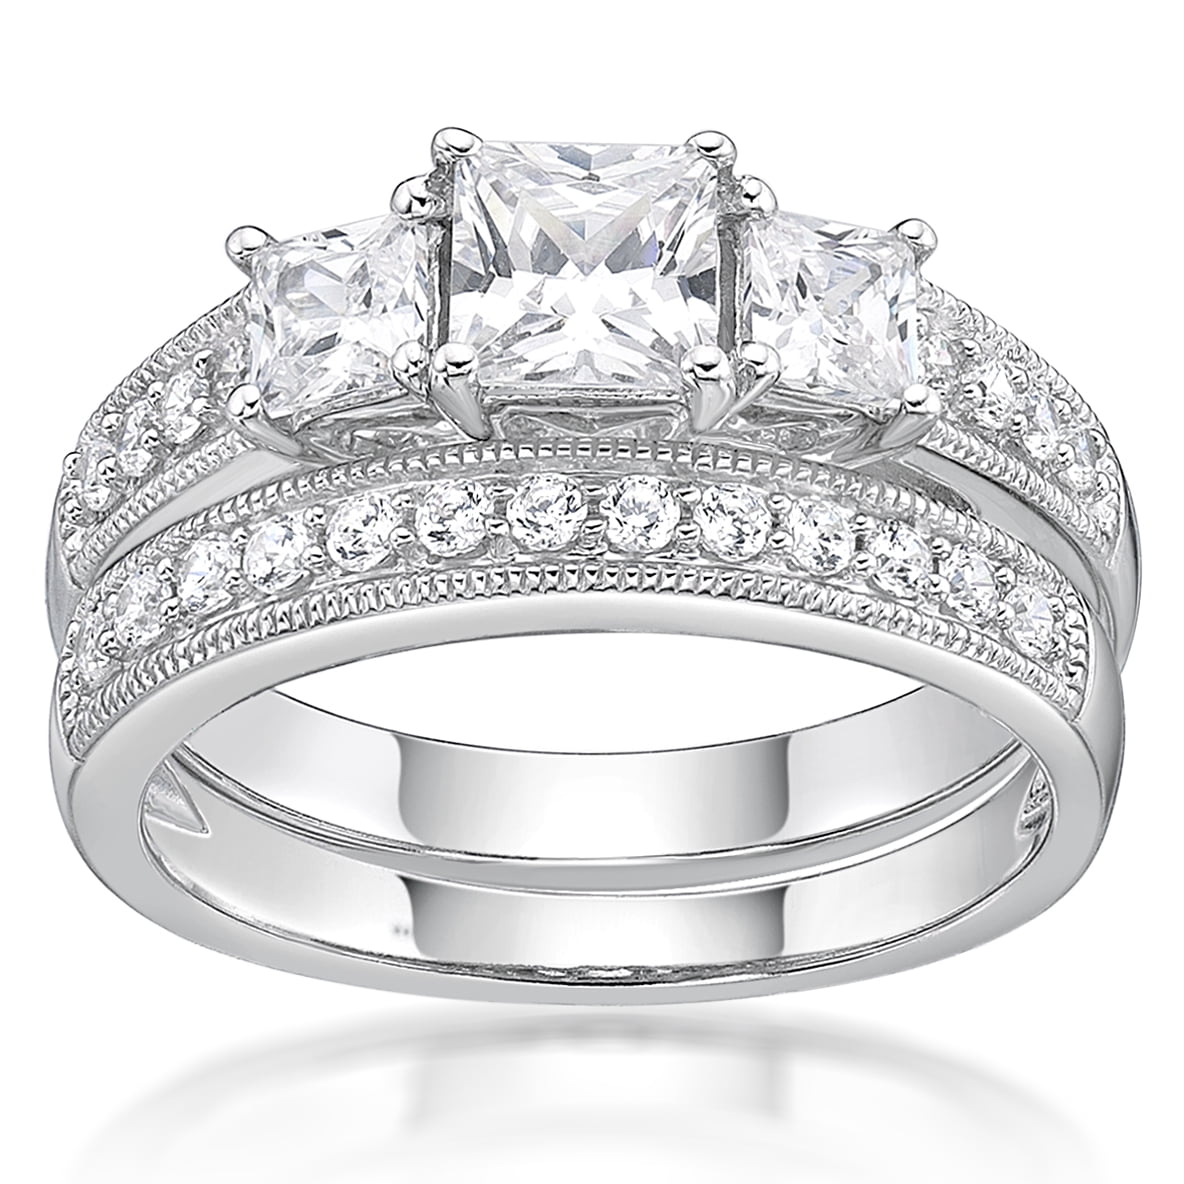 Princess Clear Diamond Simulated Genuine Silver Engagement Ring Set 